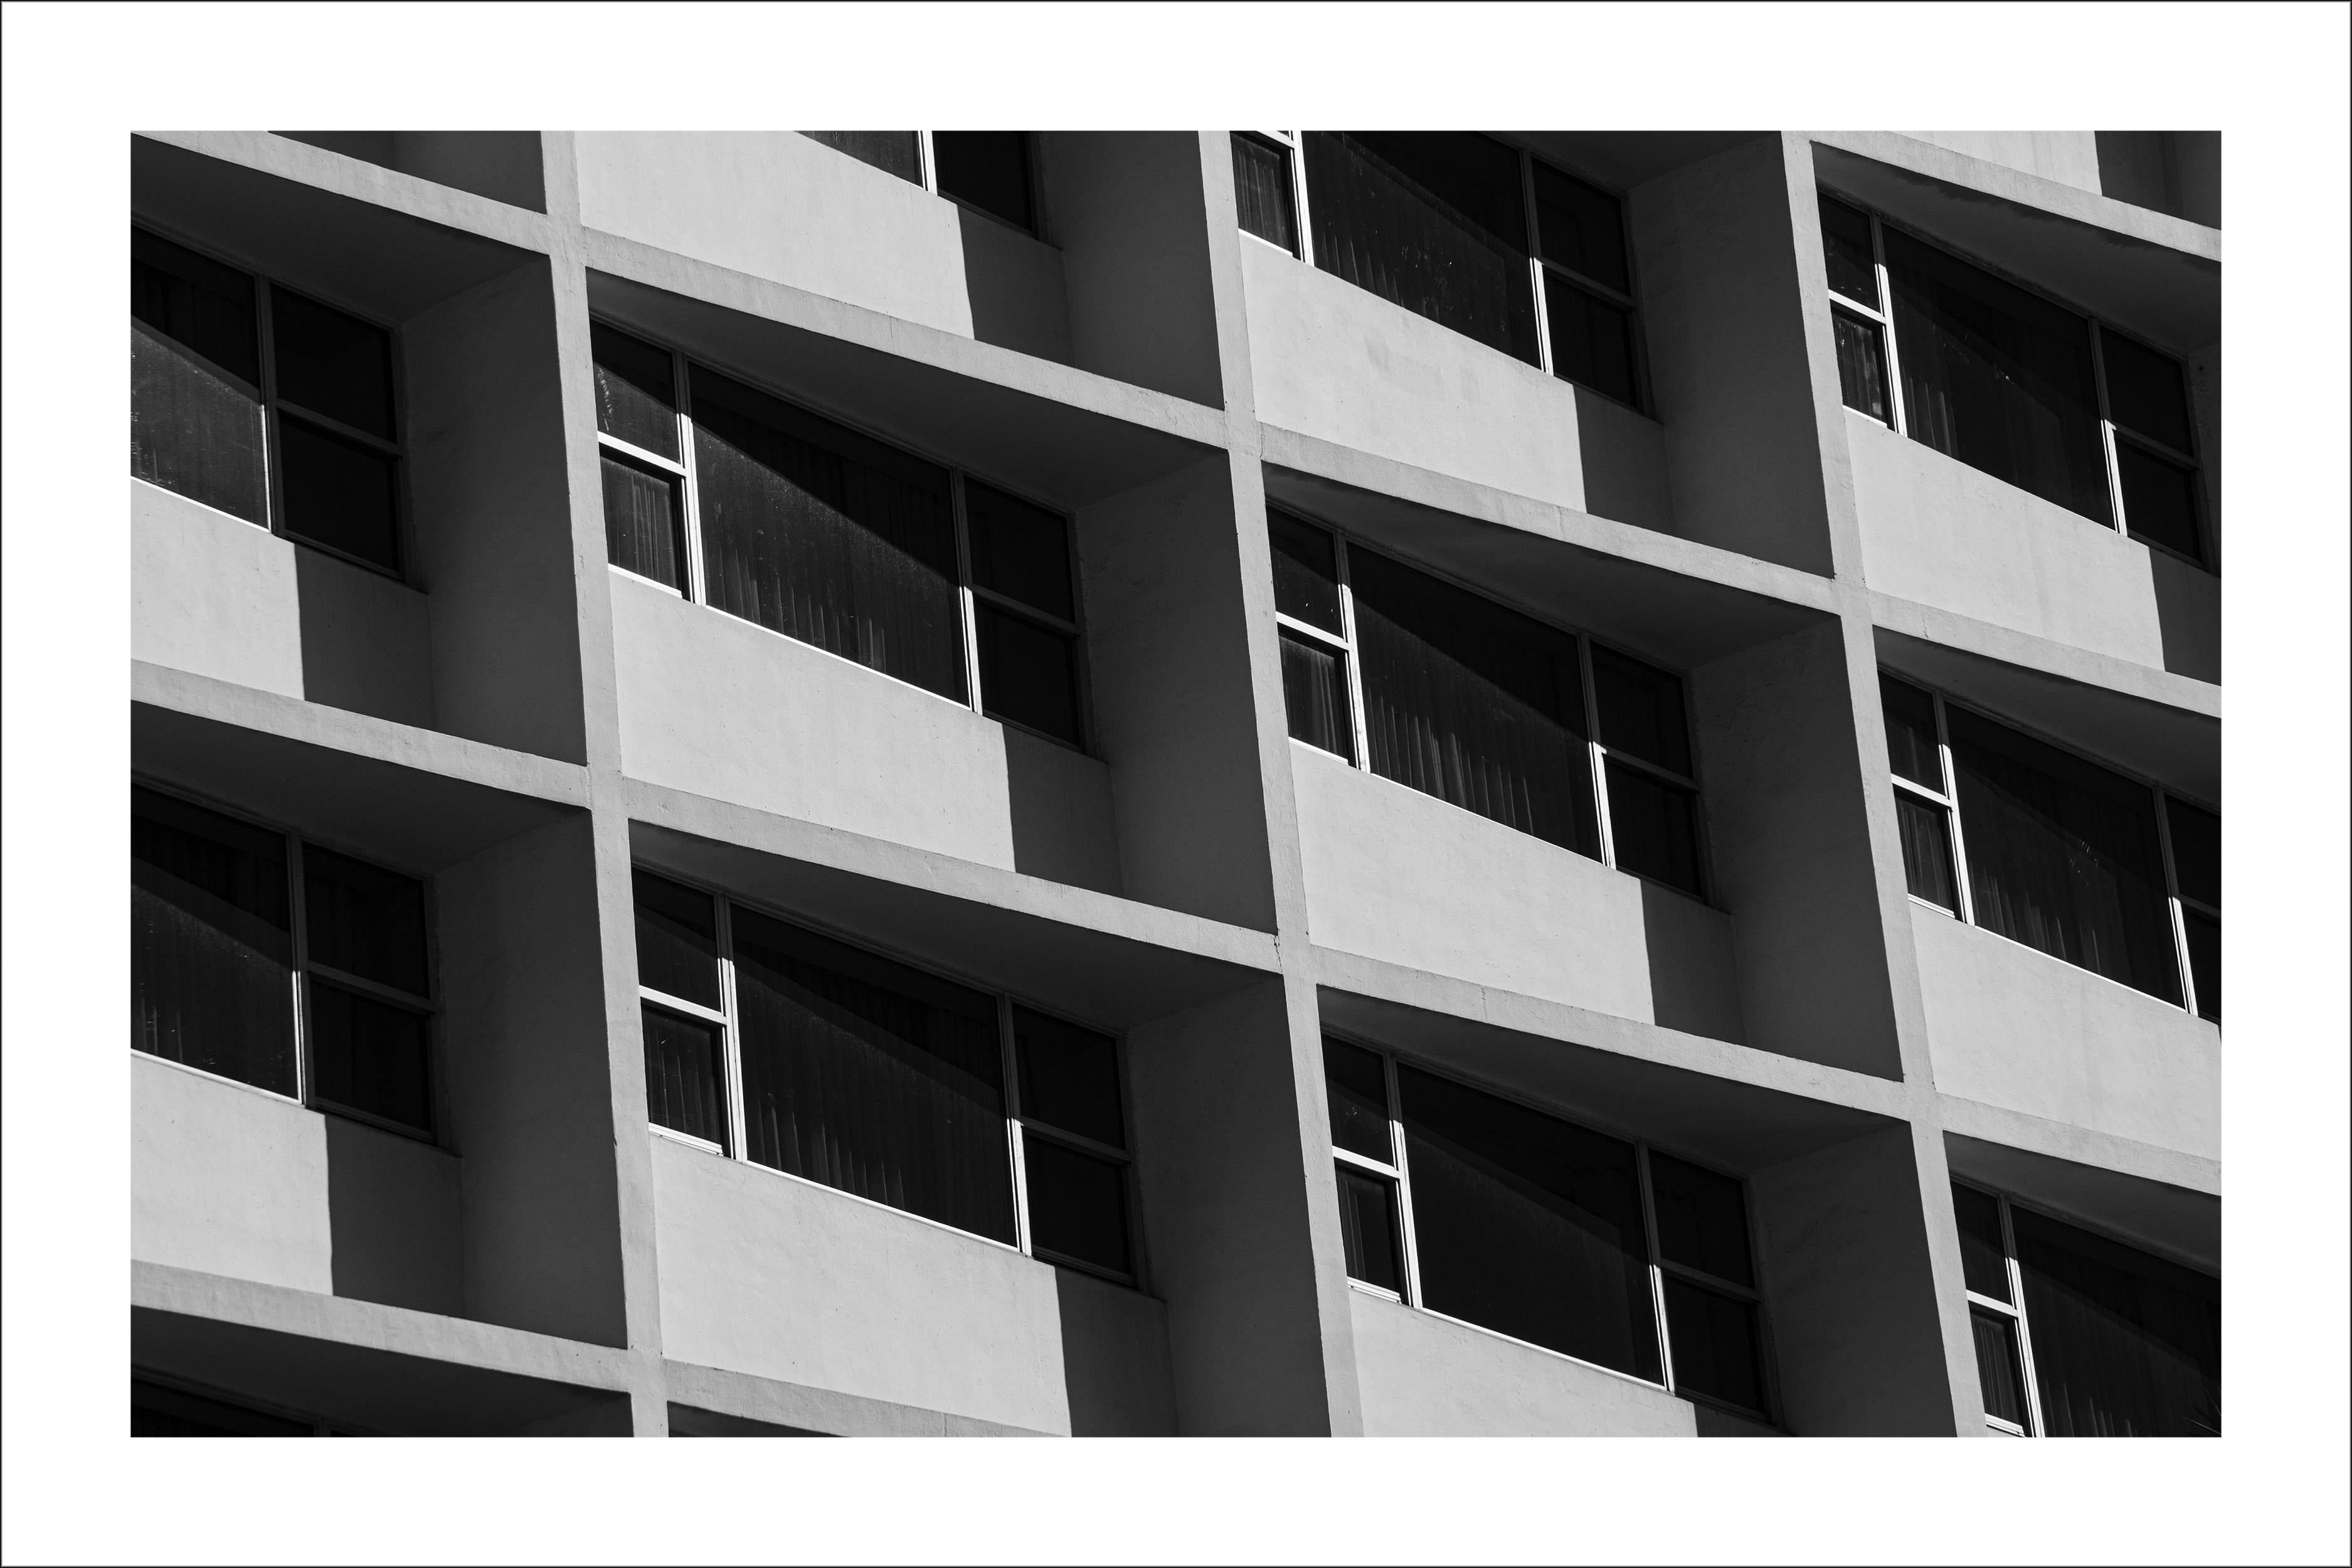 Kind of Cyan Landscape Photograph - Minimalist Architecture Grid, Black and White, Hotel Photography, Miami Pattern